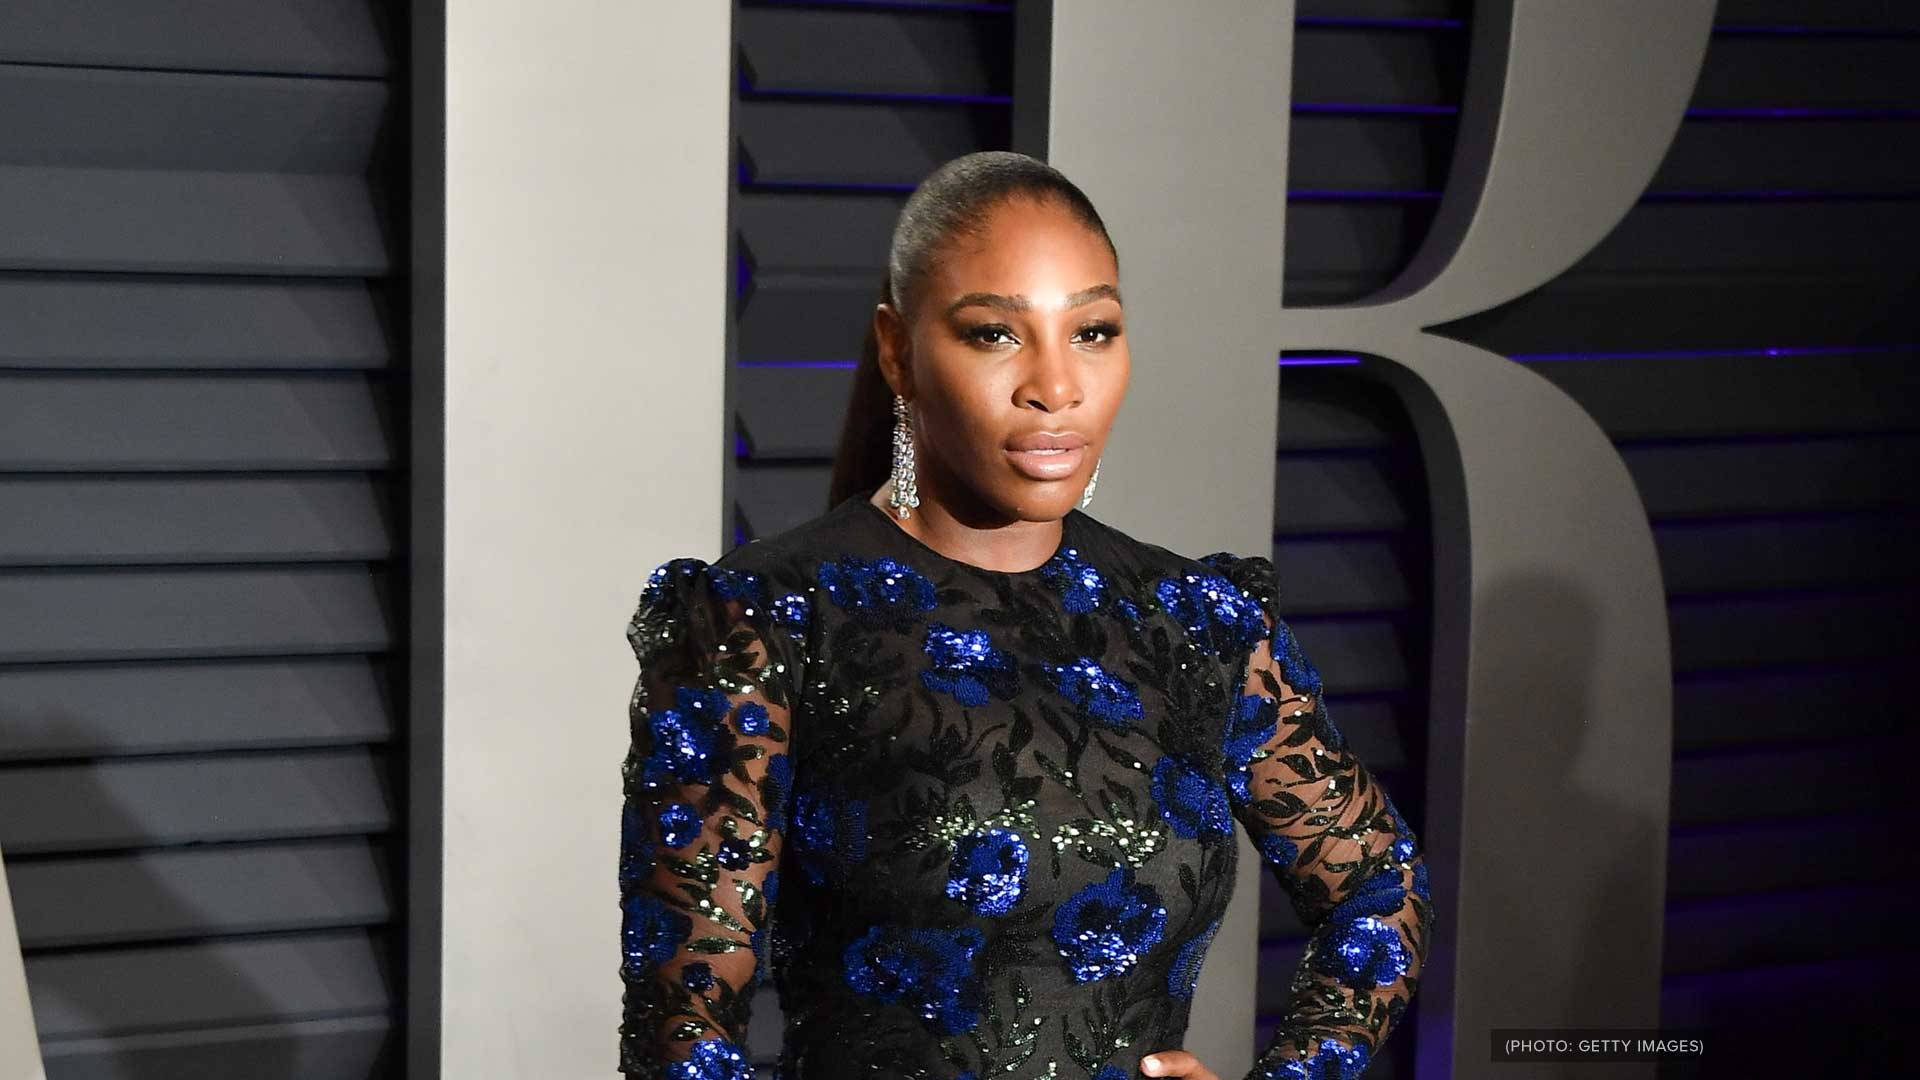 We know Serena Williams as the GOAT in tennis having won 23 major titles, most in the Open era. But, the title most precious to her is that of mom. Serena gave birth to Alexis Olympia Ohanian, Jr in 2017, seven months after winning the Australian Open with her in utero. Since then, Serena has dedicated herself to being a champion mom bringing Olympia to tournaments and events. In advance of the BET Awards 2022, which air June 26th at 8pm, let’s take a look at the "Sportswoman of the Year" nominee’s best moments.


By: Alba Anthony